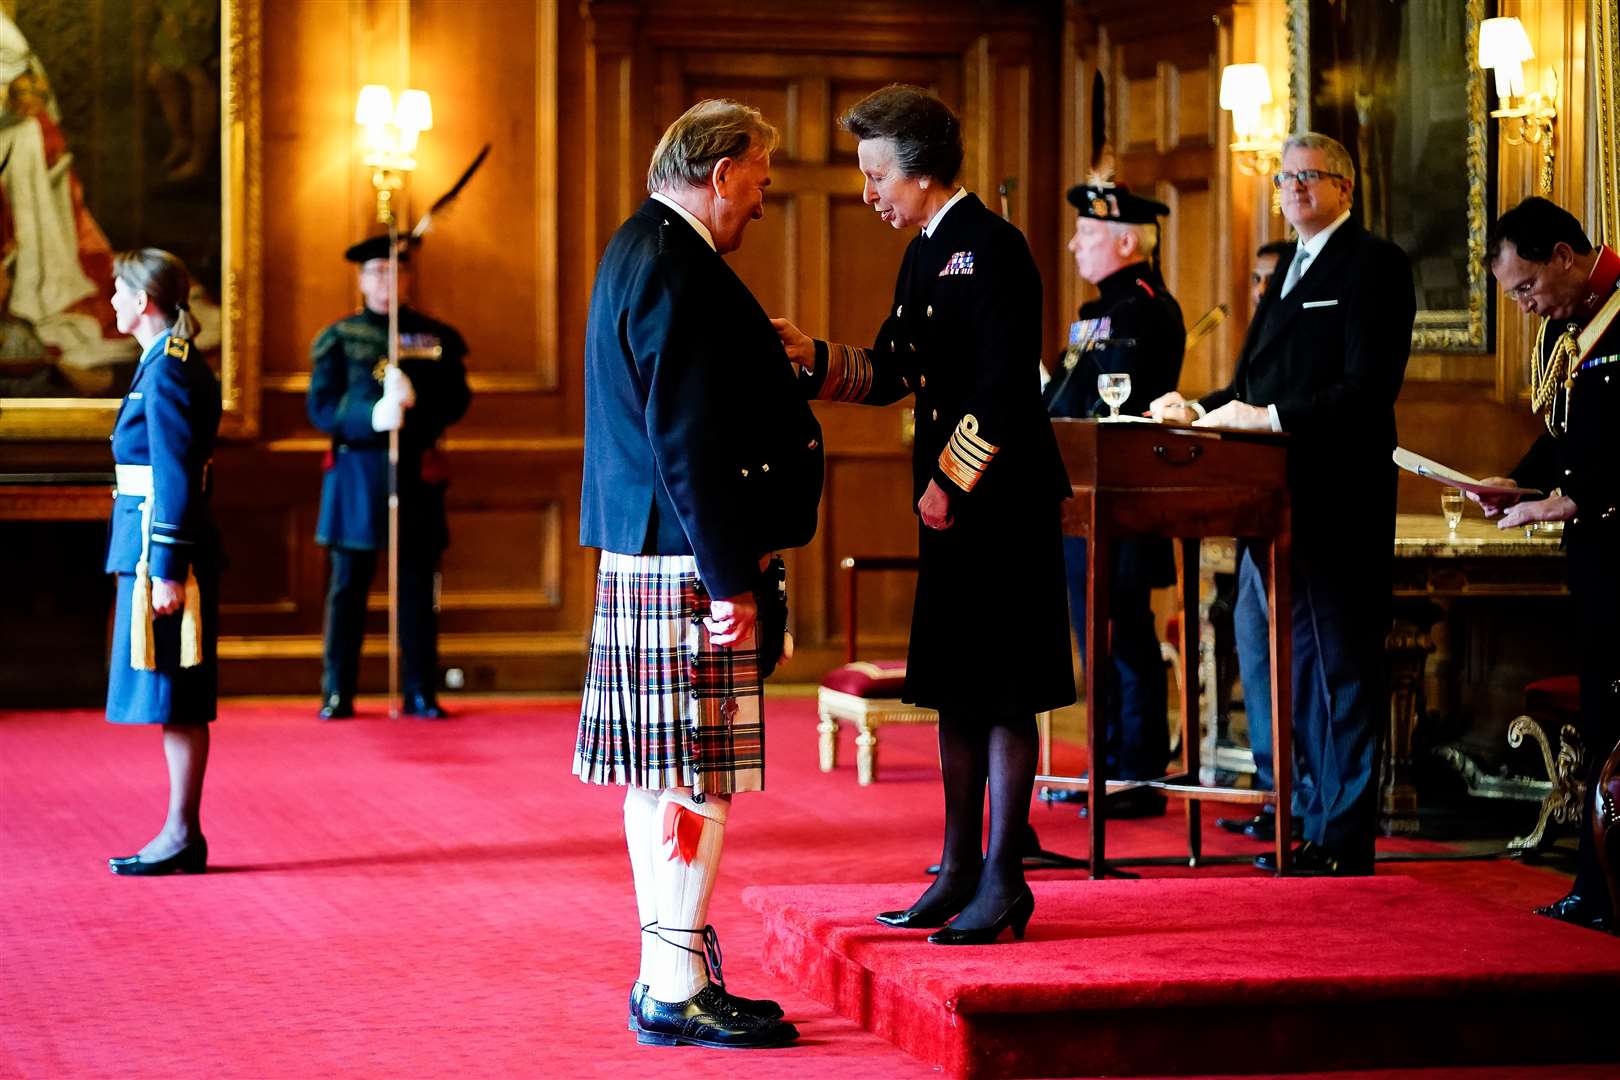 Alan Rough said he spoke to the Princess Royal about his meeting with the Queen during the Silver Jubilee (Aaron Chown/PA)